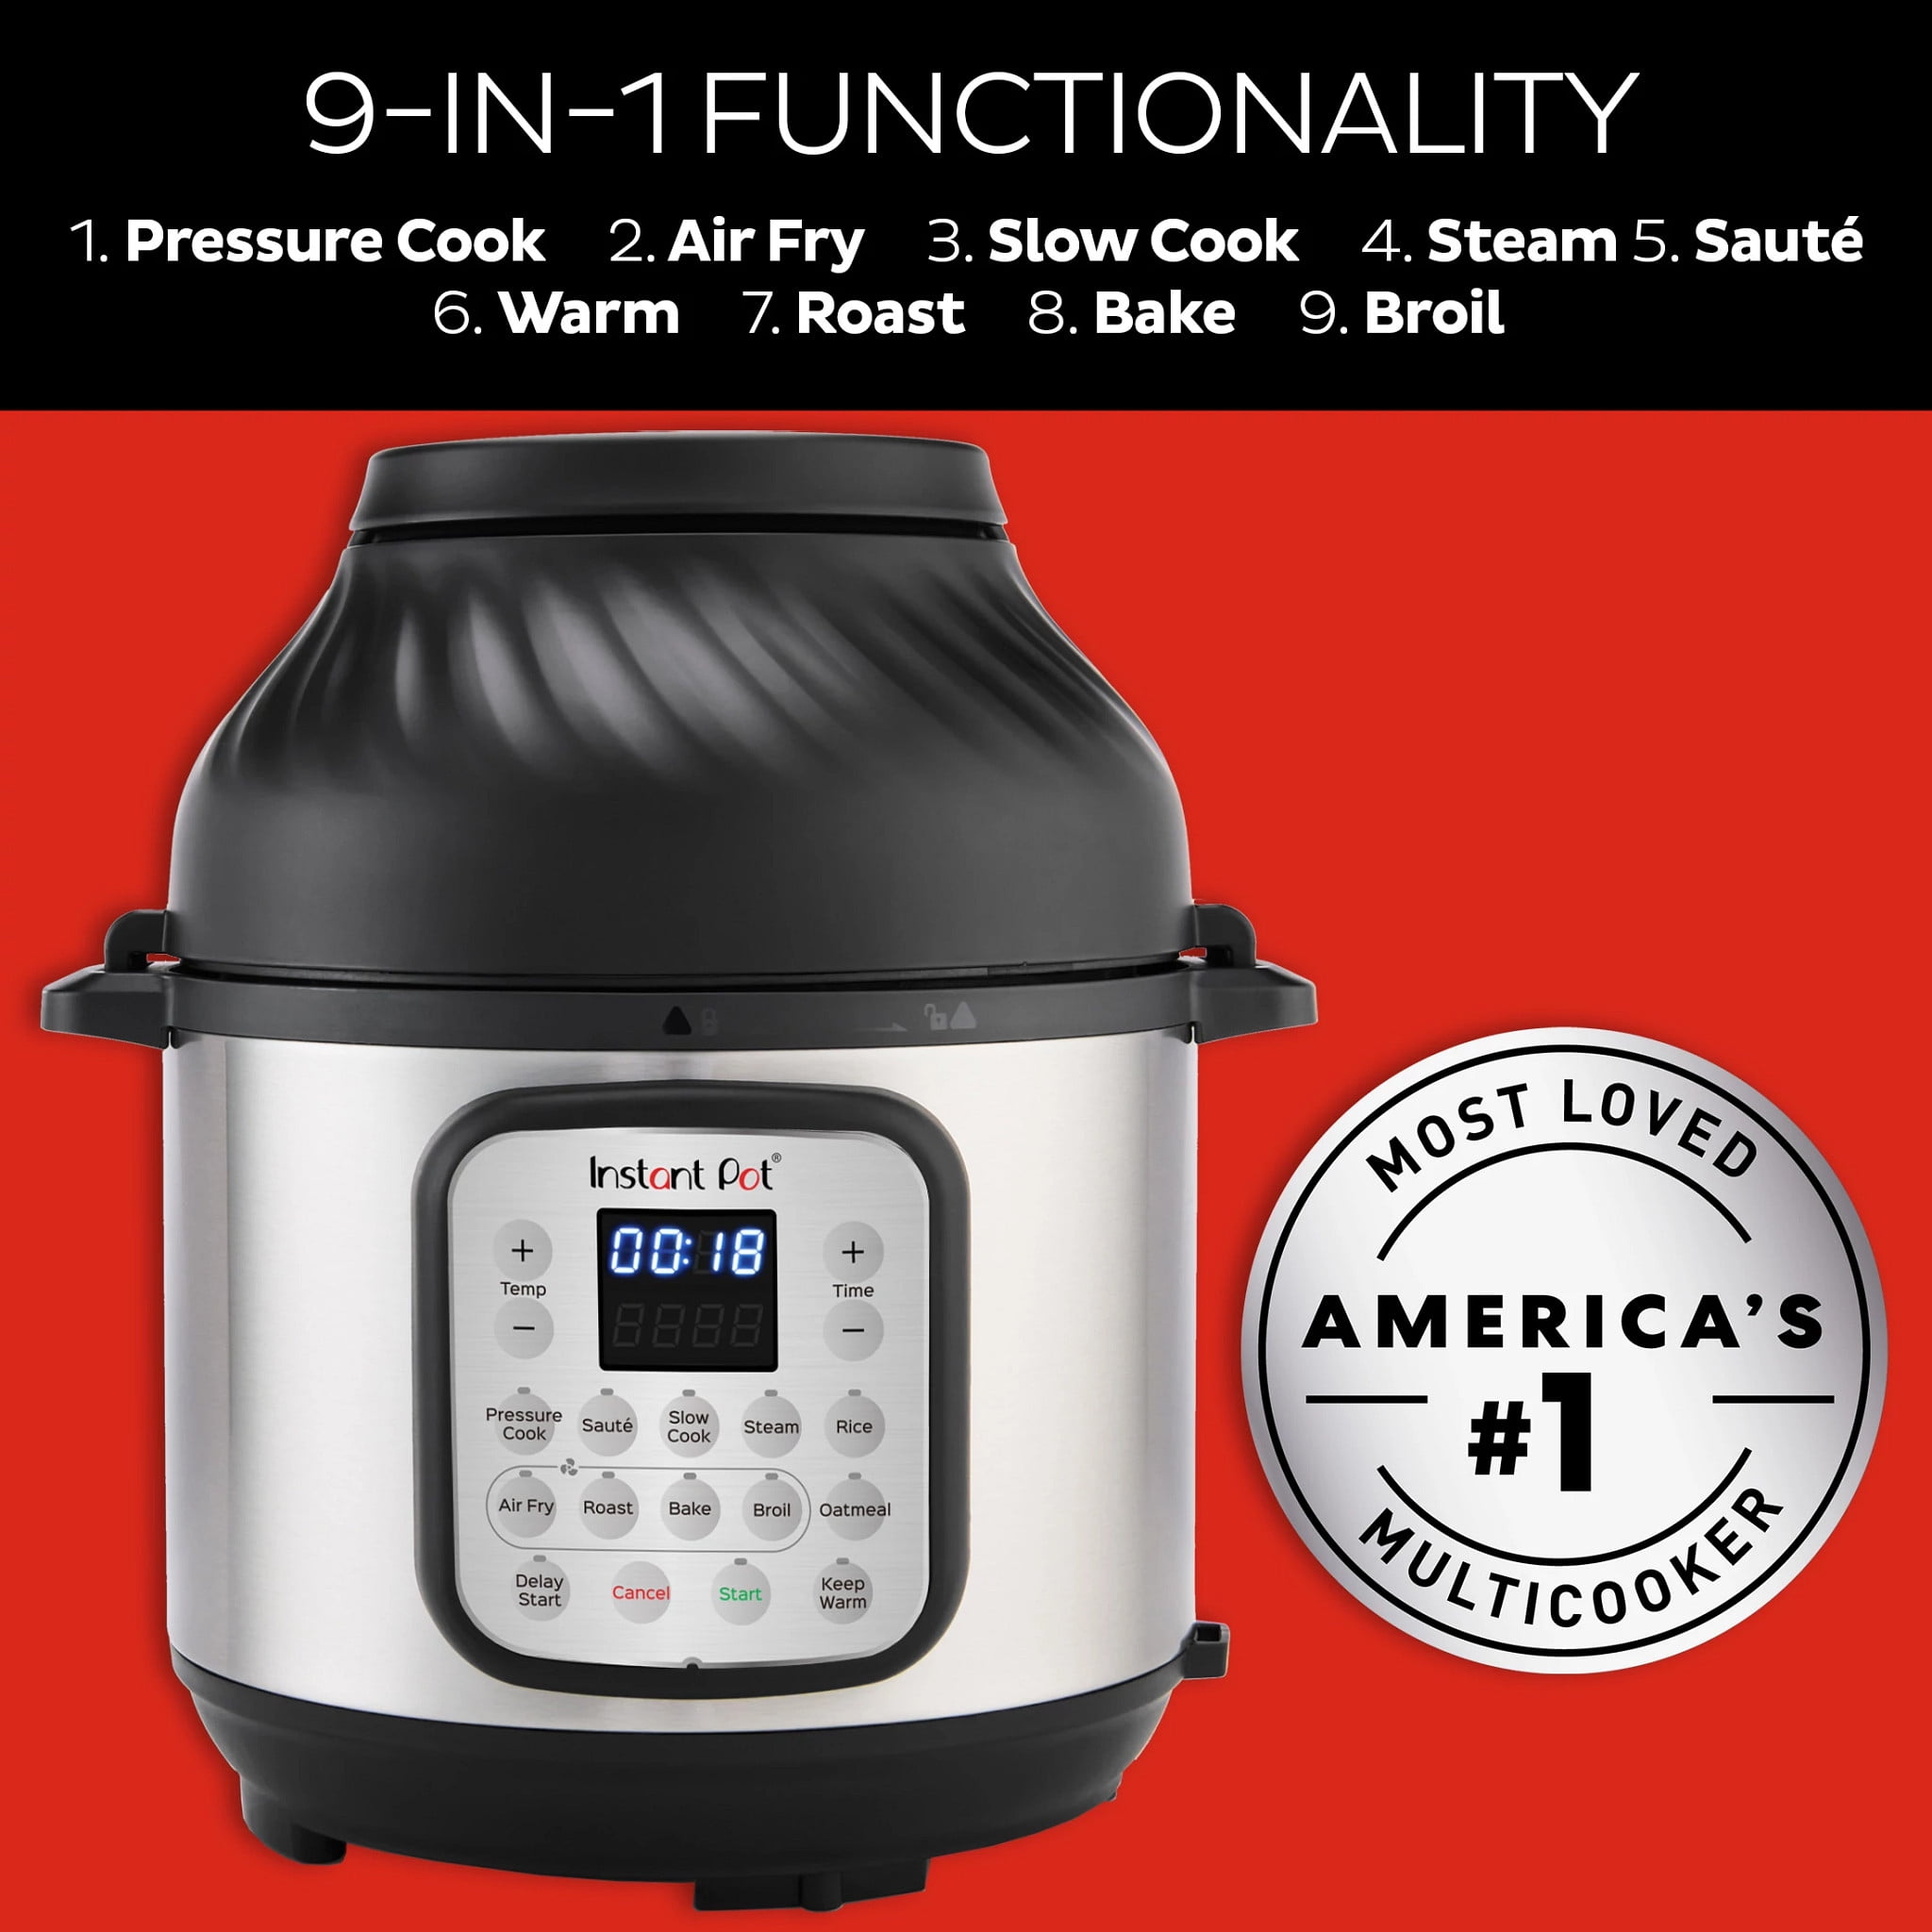 Instant Pot 140-0050-01 Duo Crisp 9-in-1 Electric Pressure Cooker and Air Fryer Combo with Stainless Steel Pot, Pressure Cook, Slow Cook